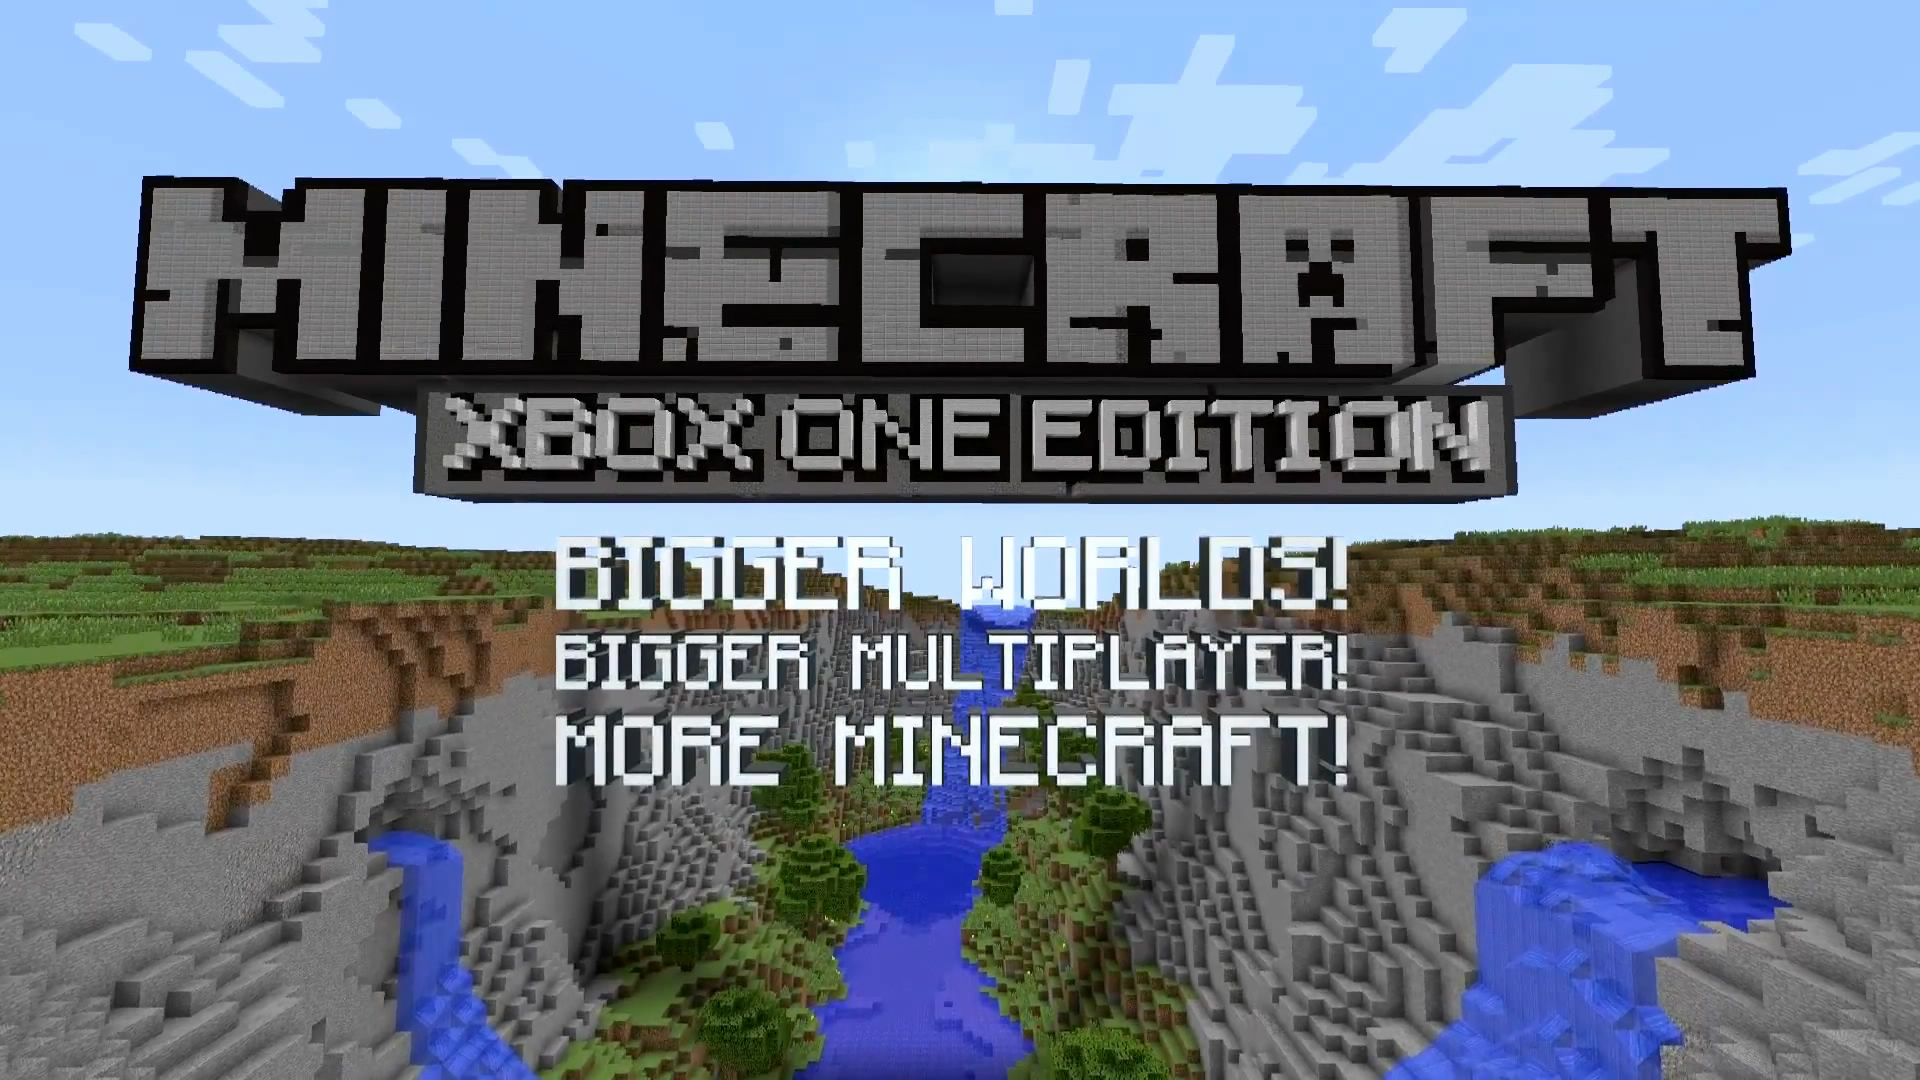 Minecraft Xbox One Edition finally releases this Friday Eggplante!